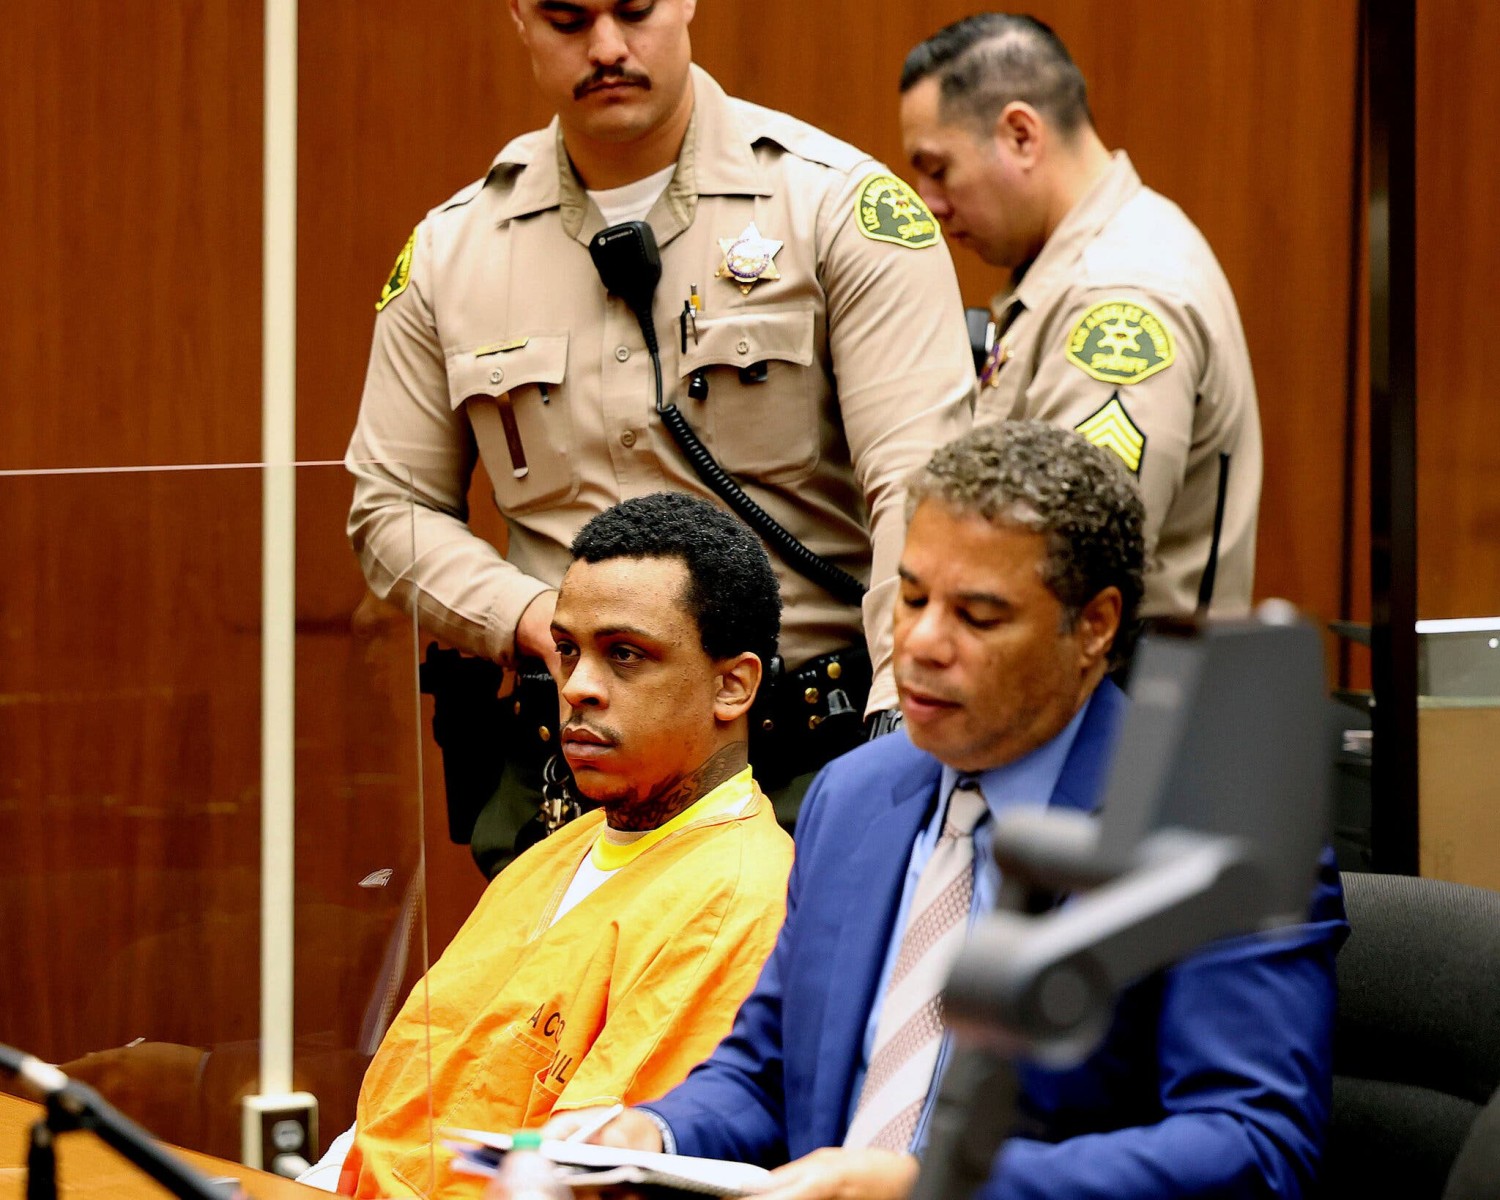 Eric R. Holder Jr., left, was found guilty of first-degree murder last year, more than three years after fatally shooting the Los Angeles rapper Nipsey Hussle.Credit...Pool photo by Frederick M. Brown